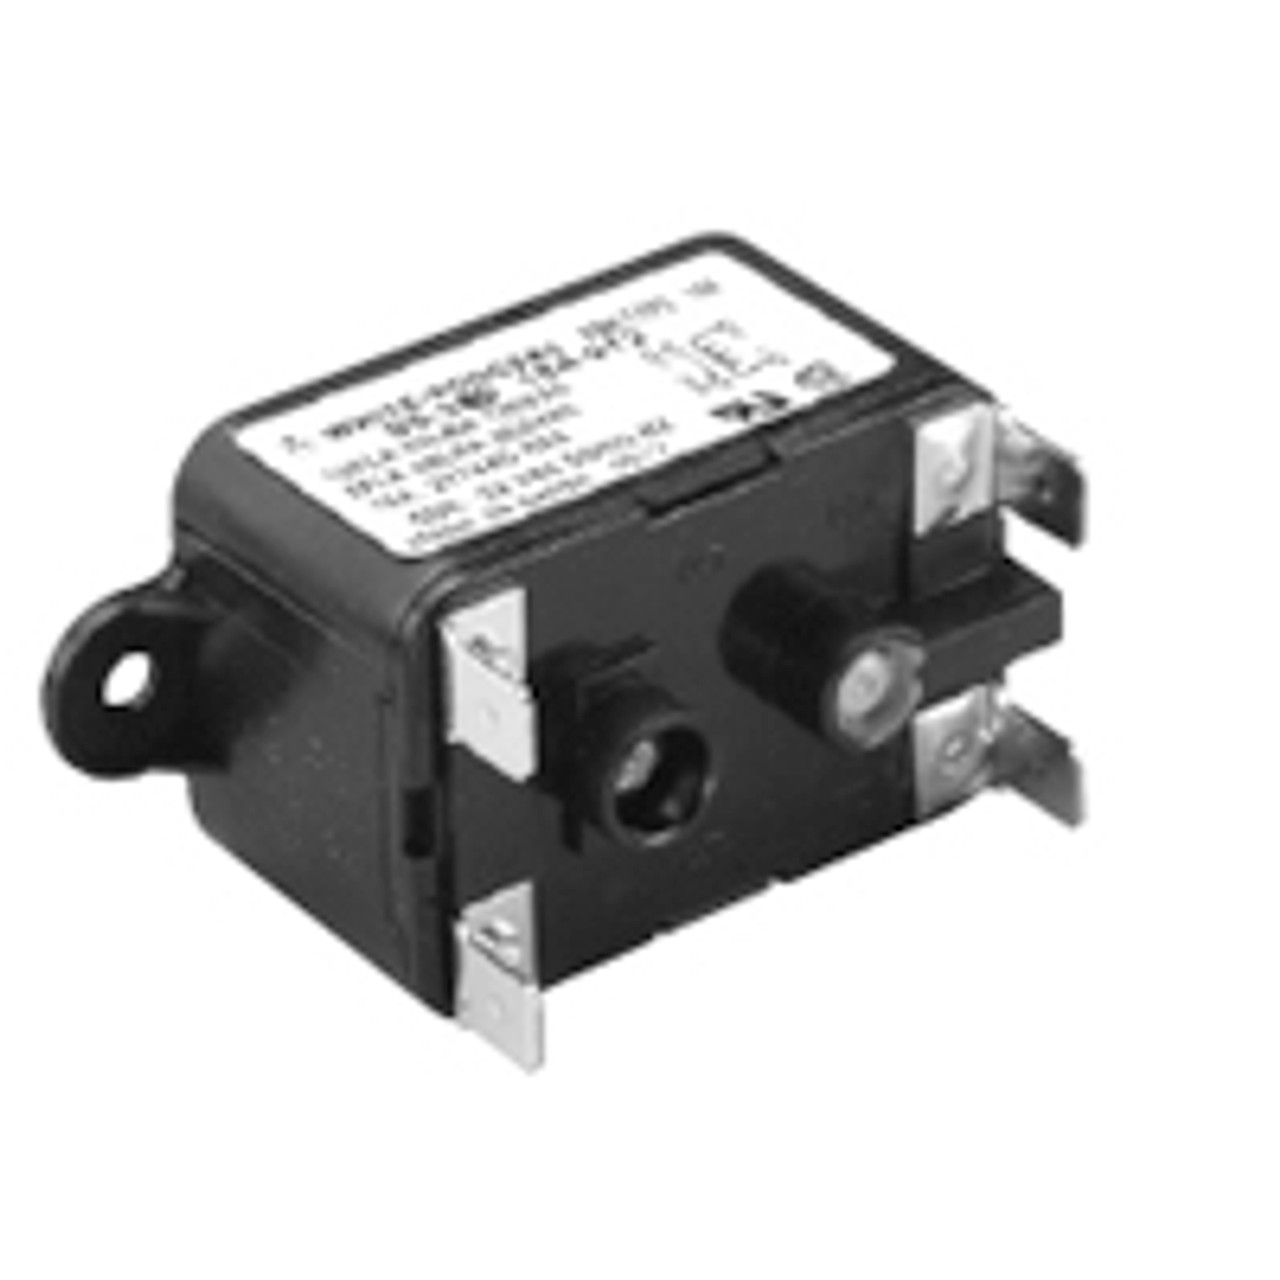 Stancor / White Rodgers 184-930 Power Relays